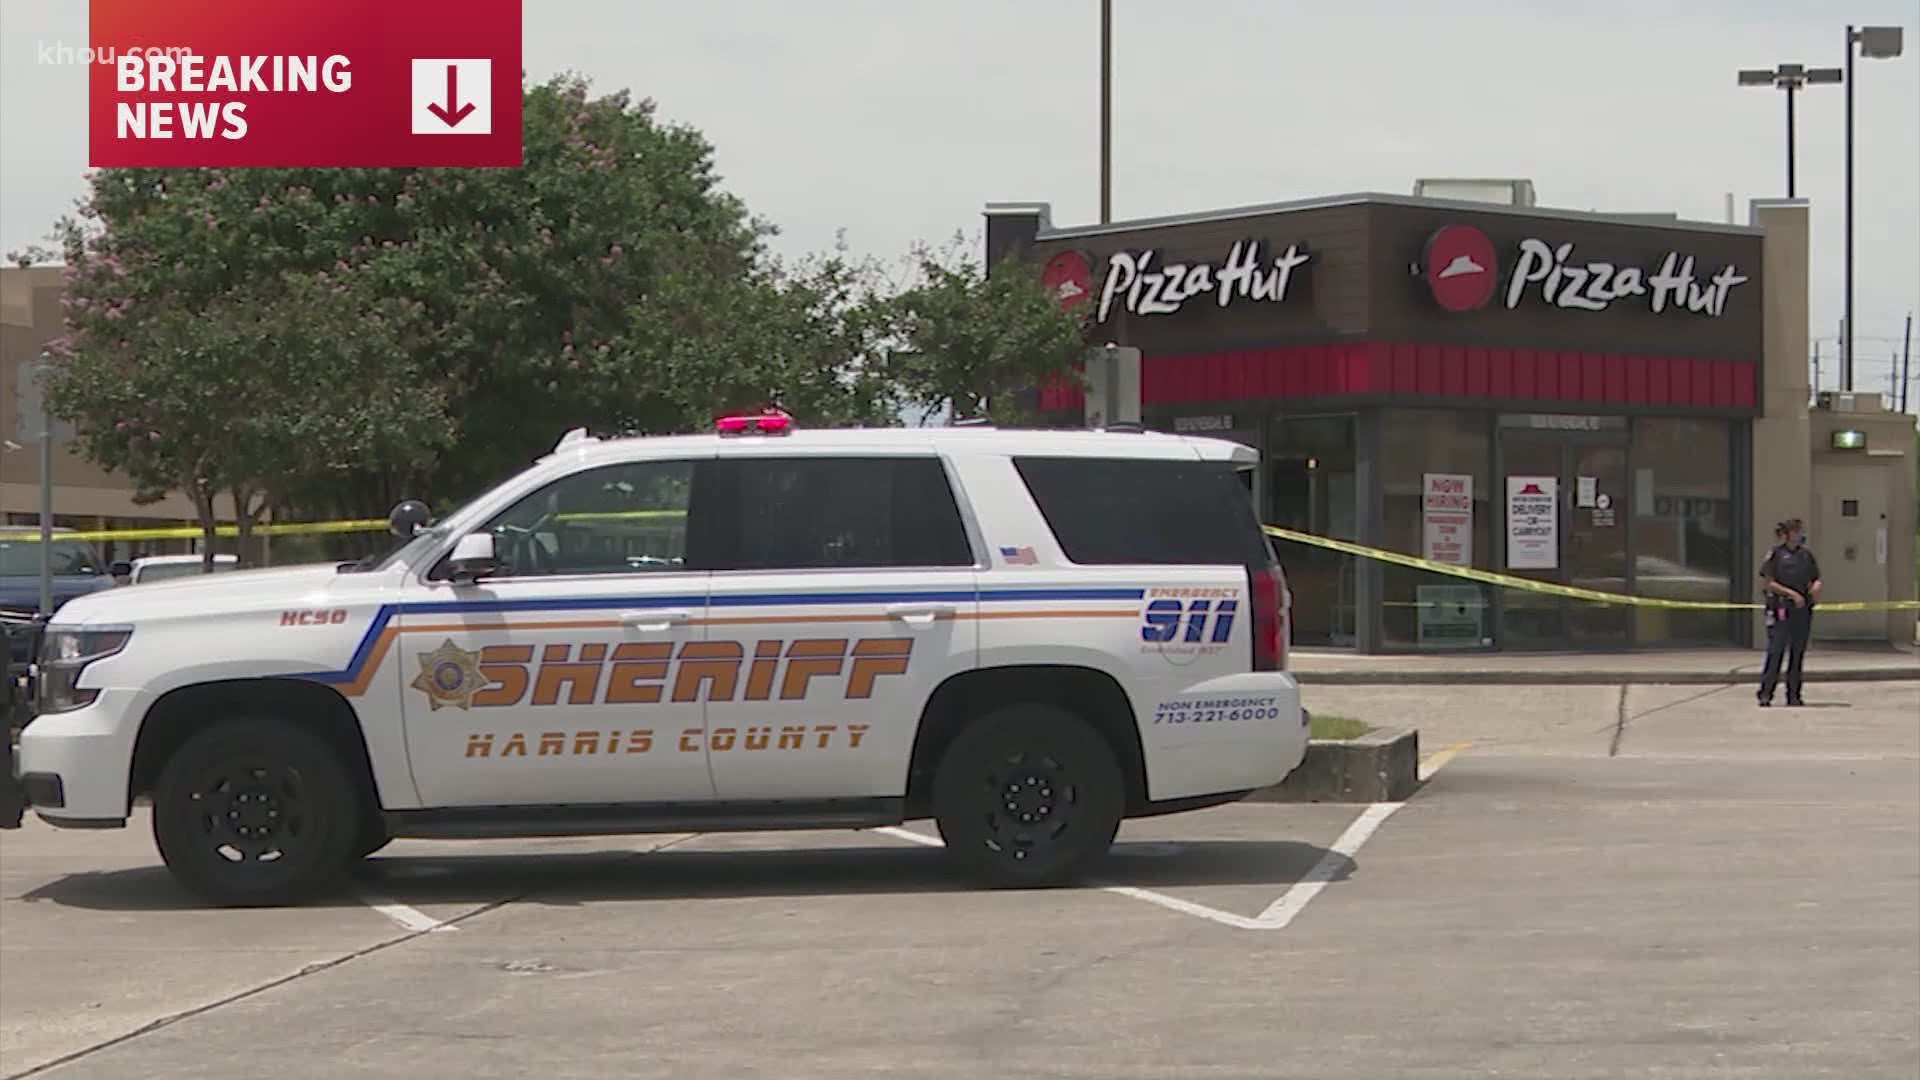 A 47-year-old employee was shot several times. He was taken to an area hospital and is in critical condition.